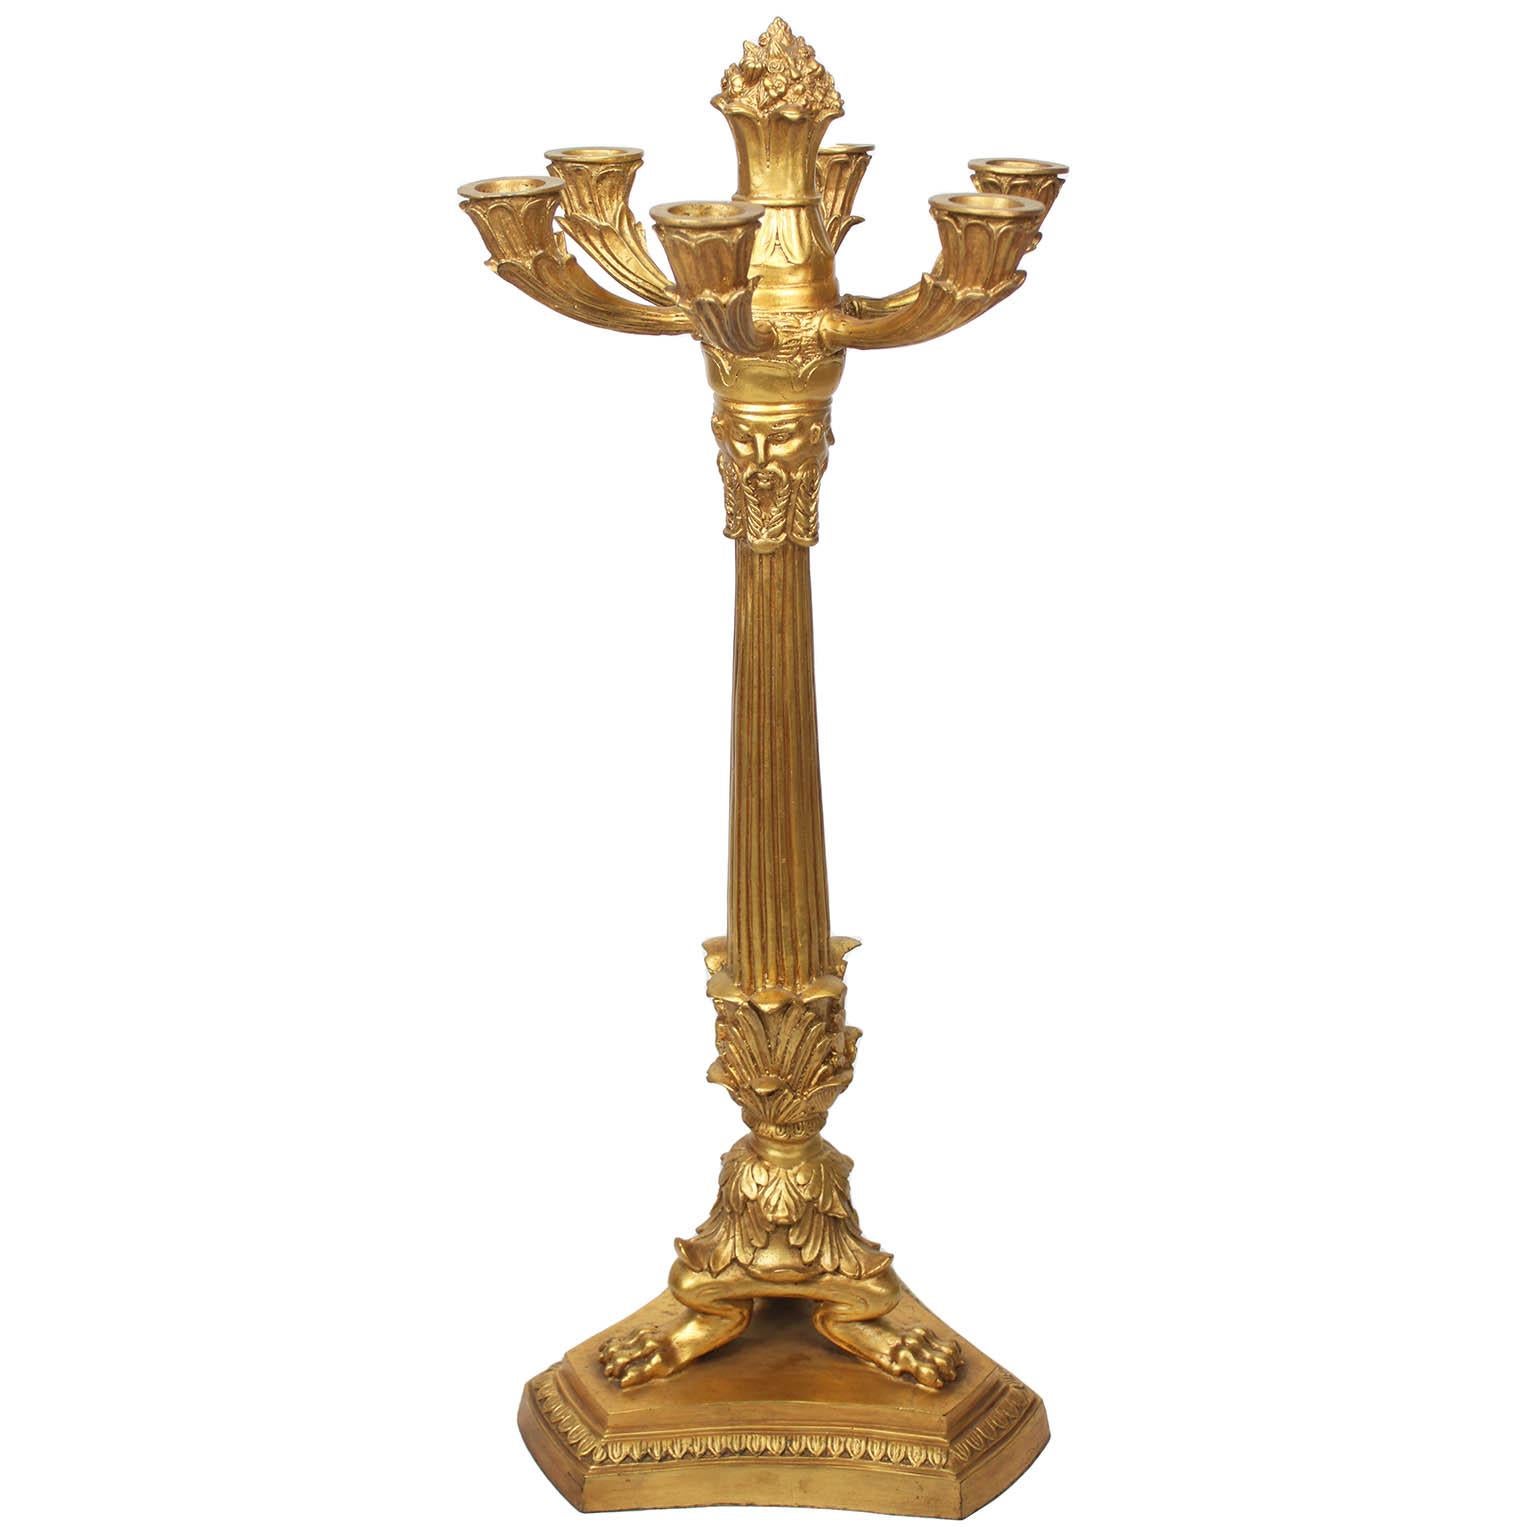 A Tall Pair of Empire Revival Style Gilt-Metal Six-Light Candelabra, after a model by Pierre-Philippe Thomire (1751–1843). Each gilt-leaf finished candelabra with a fluted center stem crowned with six-scrolled candle-arms and centered with a floral